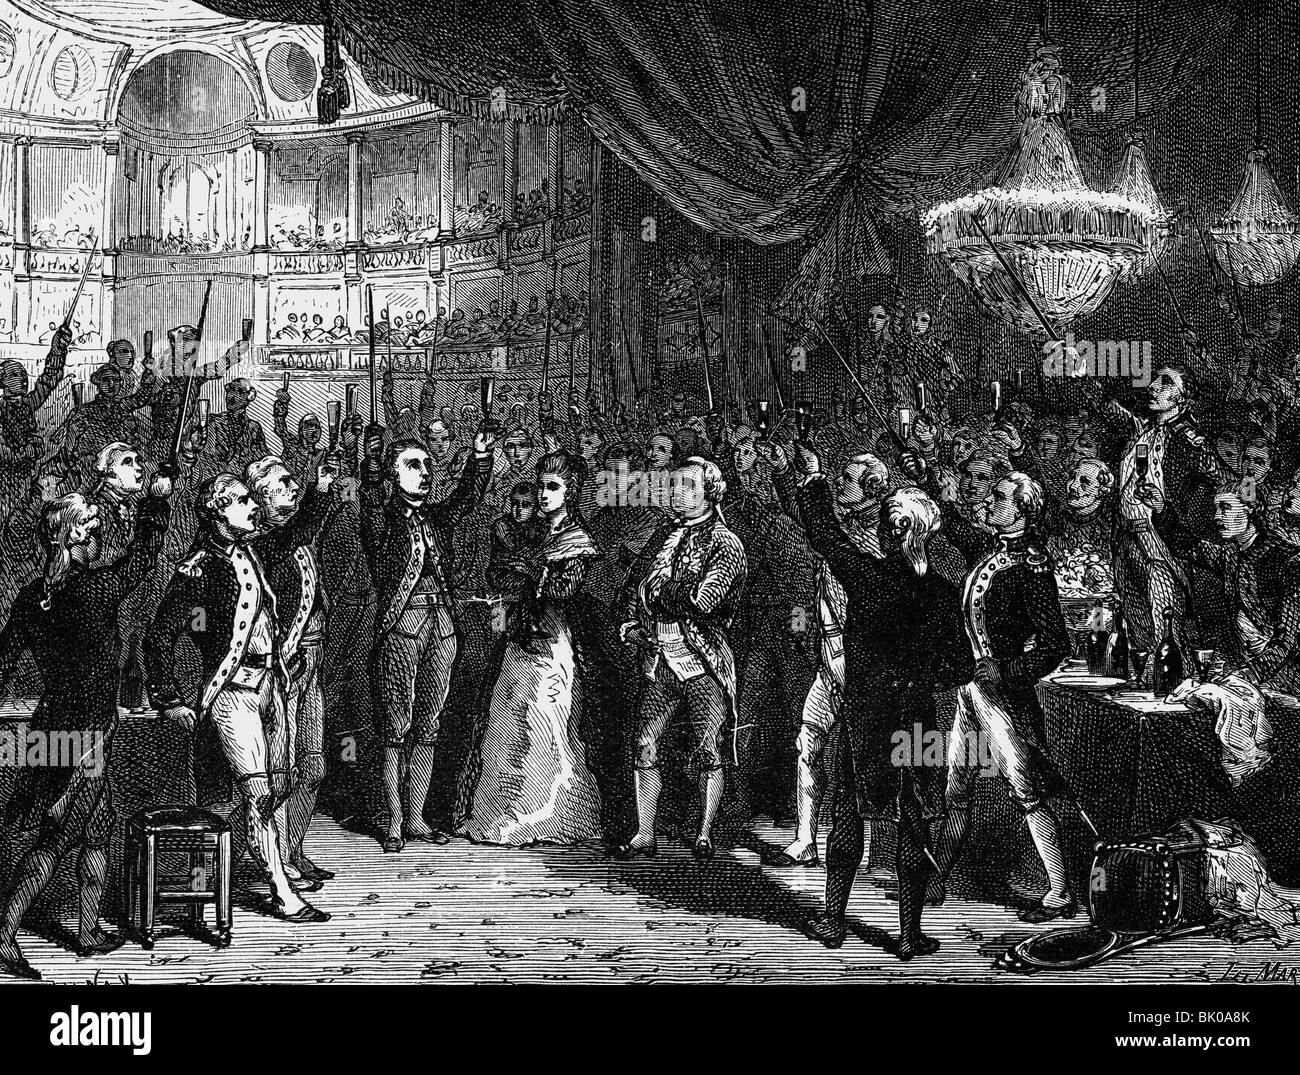 geography / travel, France, French Revolution 1789 - 1799, banquet of the Life Guards, Versailles, 1.10.1789, wood engraving, 19th century, King Louis XVI, Queen Marie Antoinette, officers, guard, military, 18th century, historic, historical, people, Stock Photo